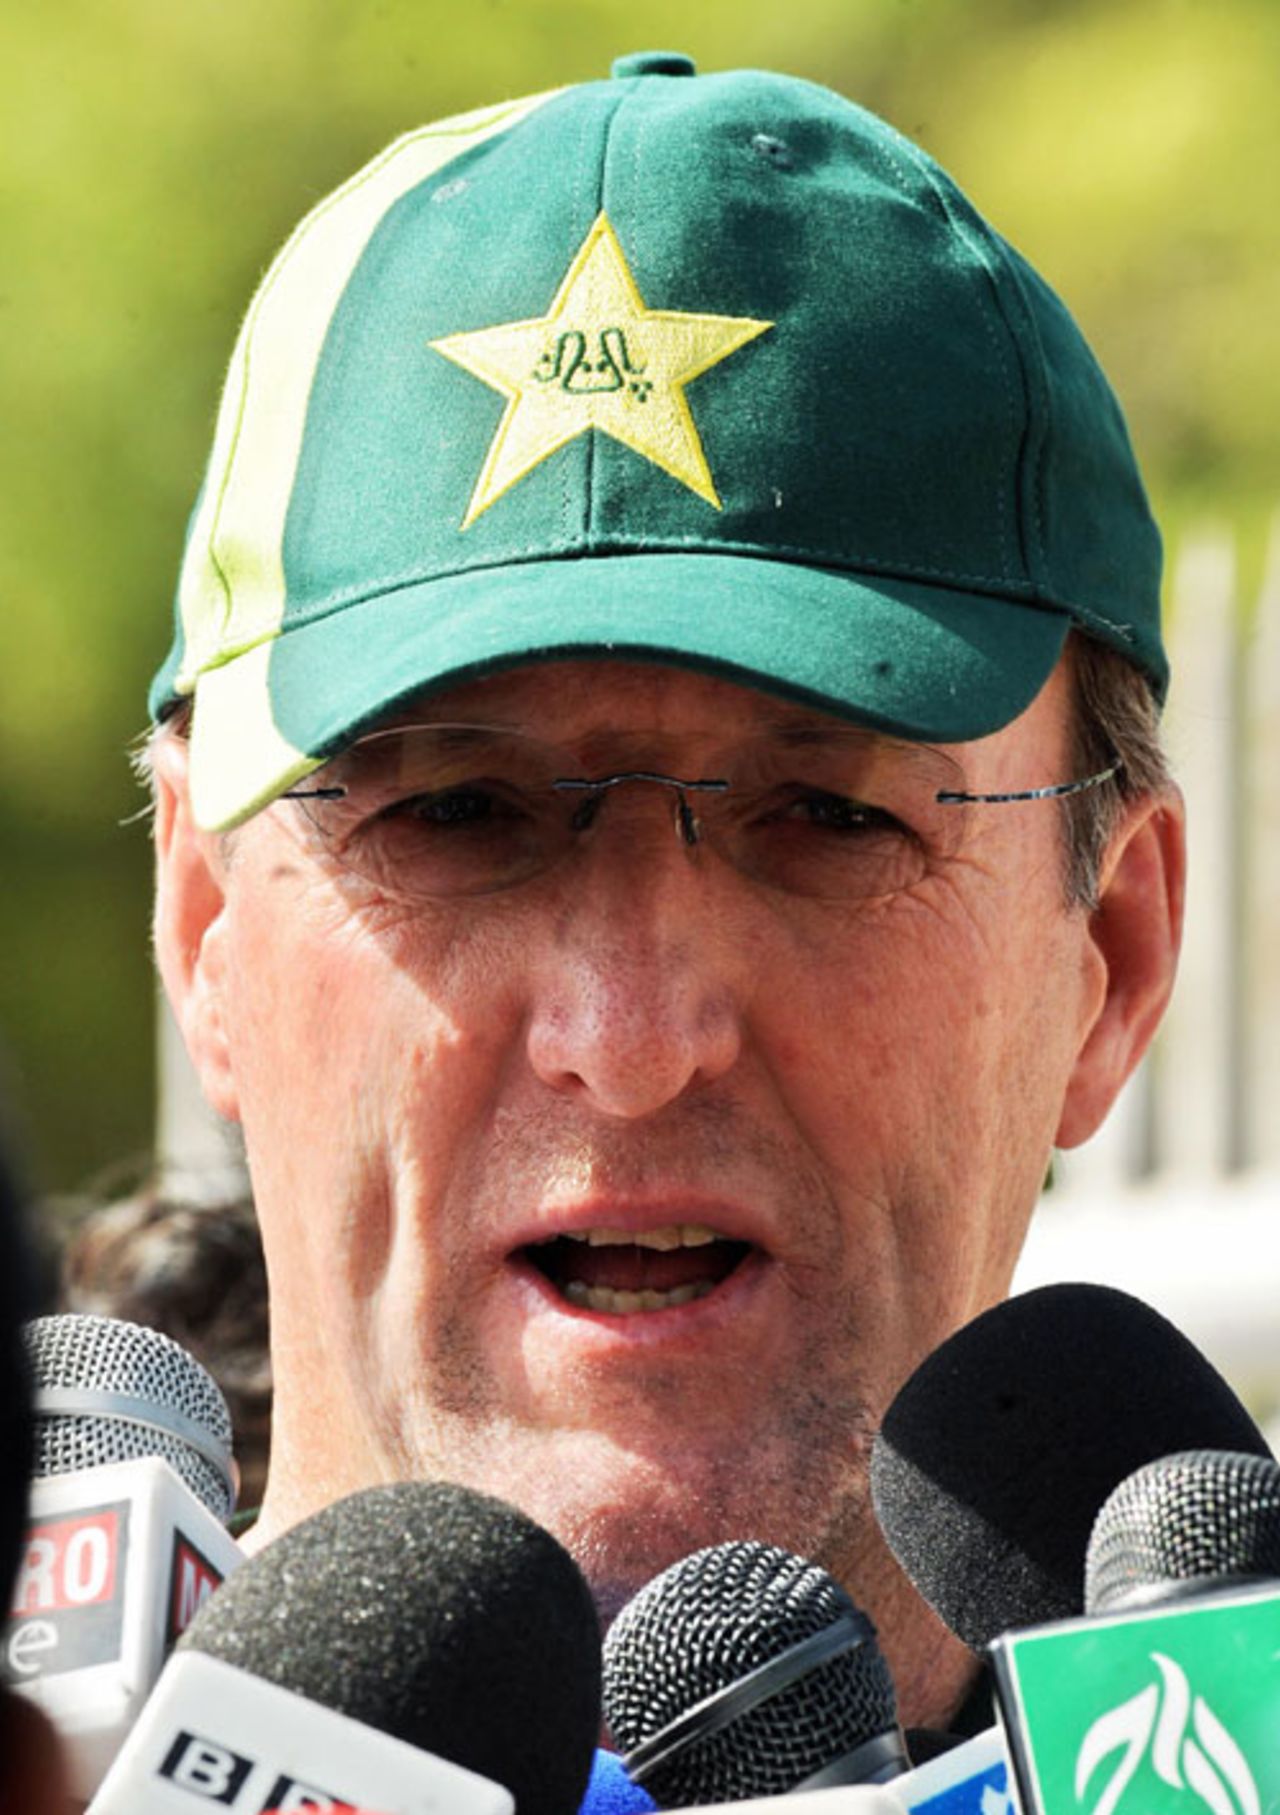 Geoff Lawson answers questions about Mohammad Asif, Karachi, June 5, 2008